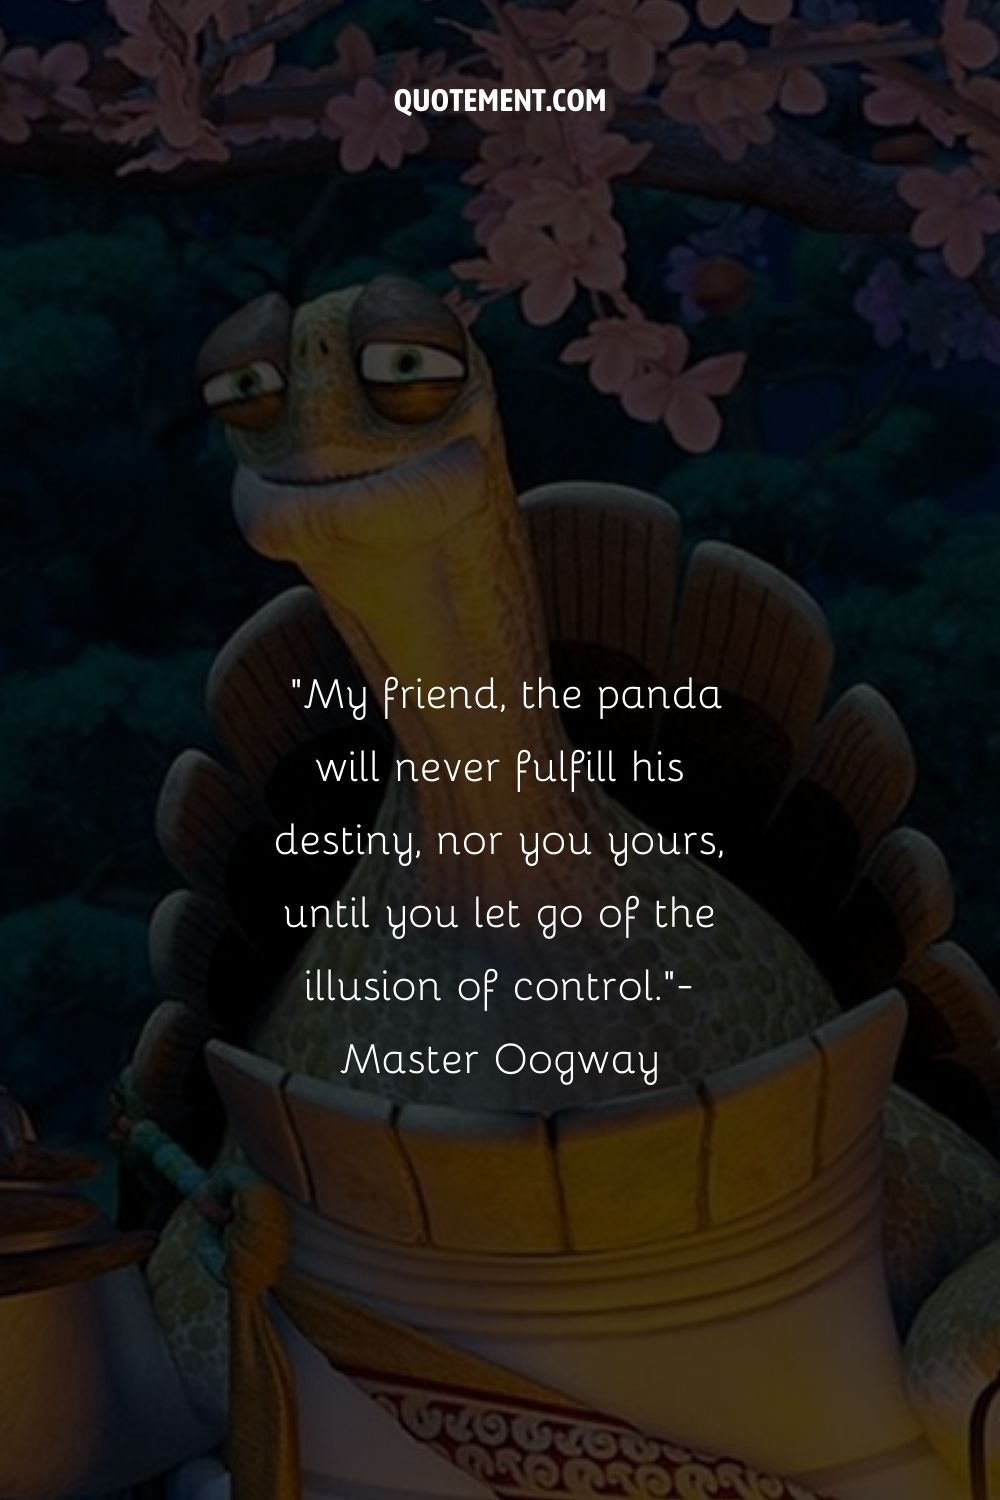 Kung Fu Panda quote from Master Oogway.
